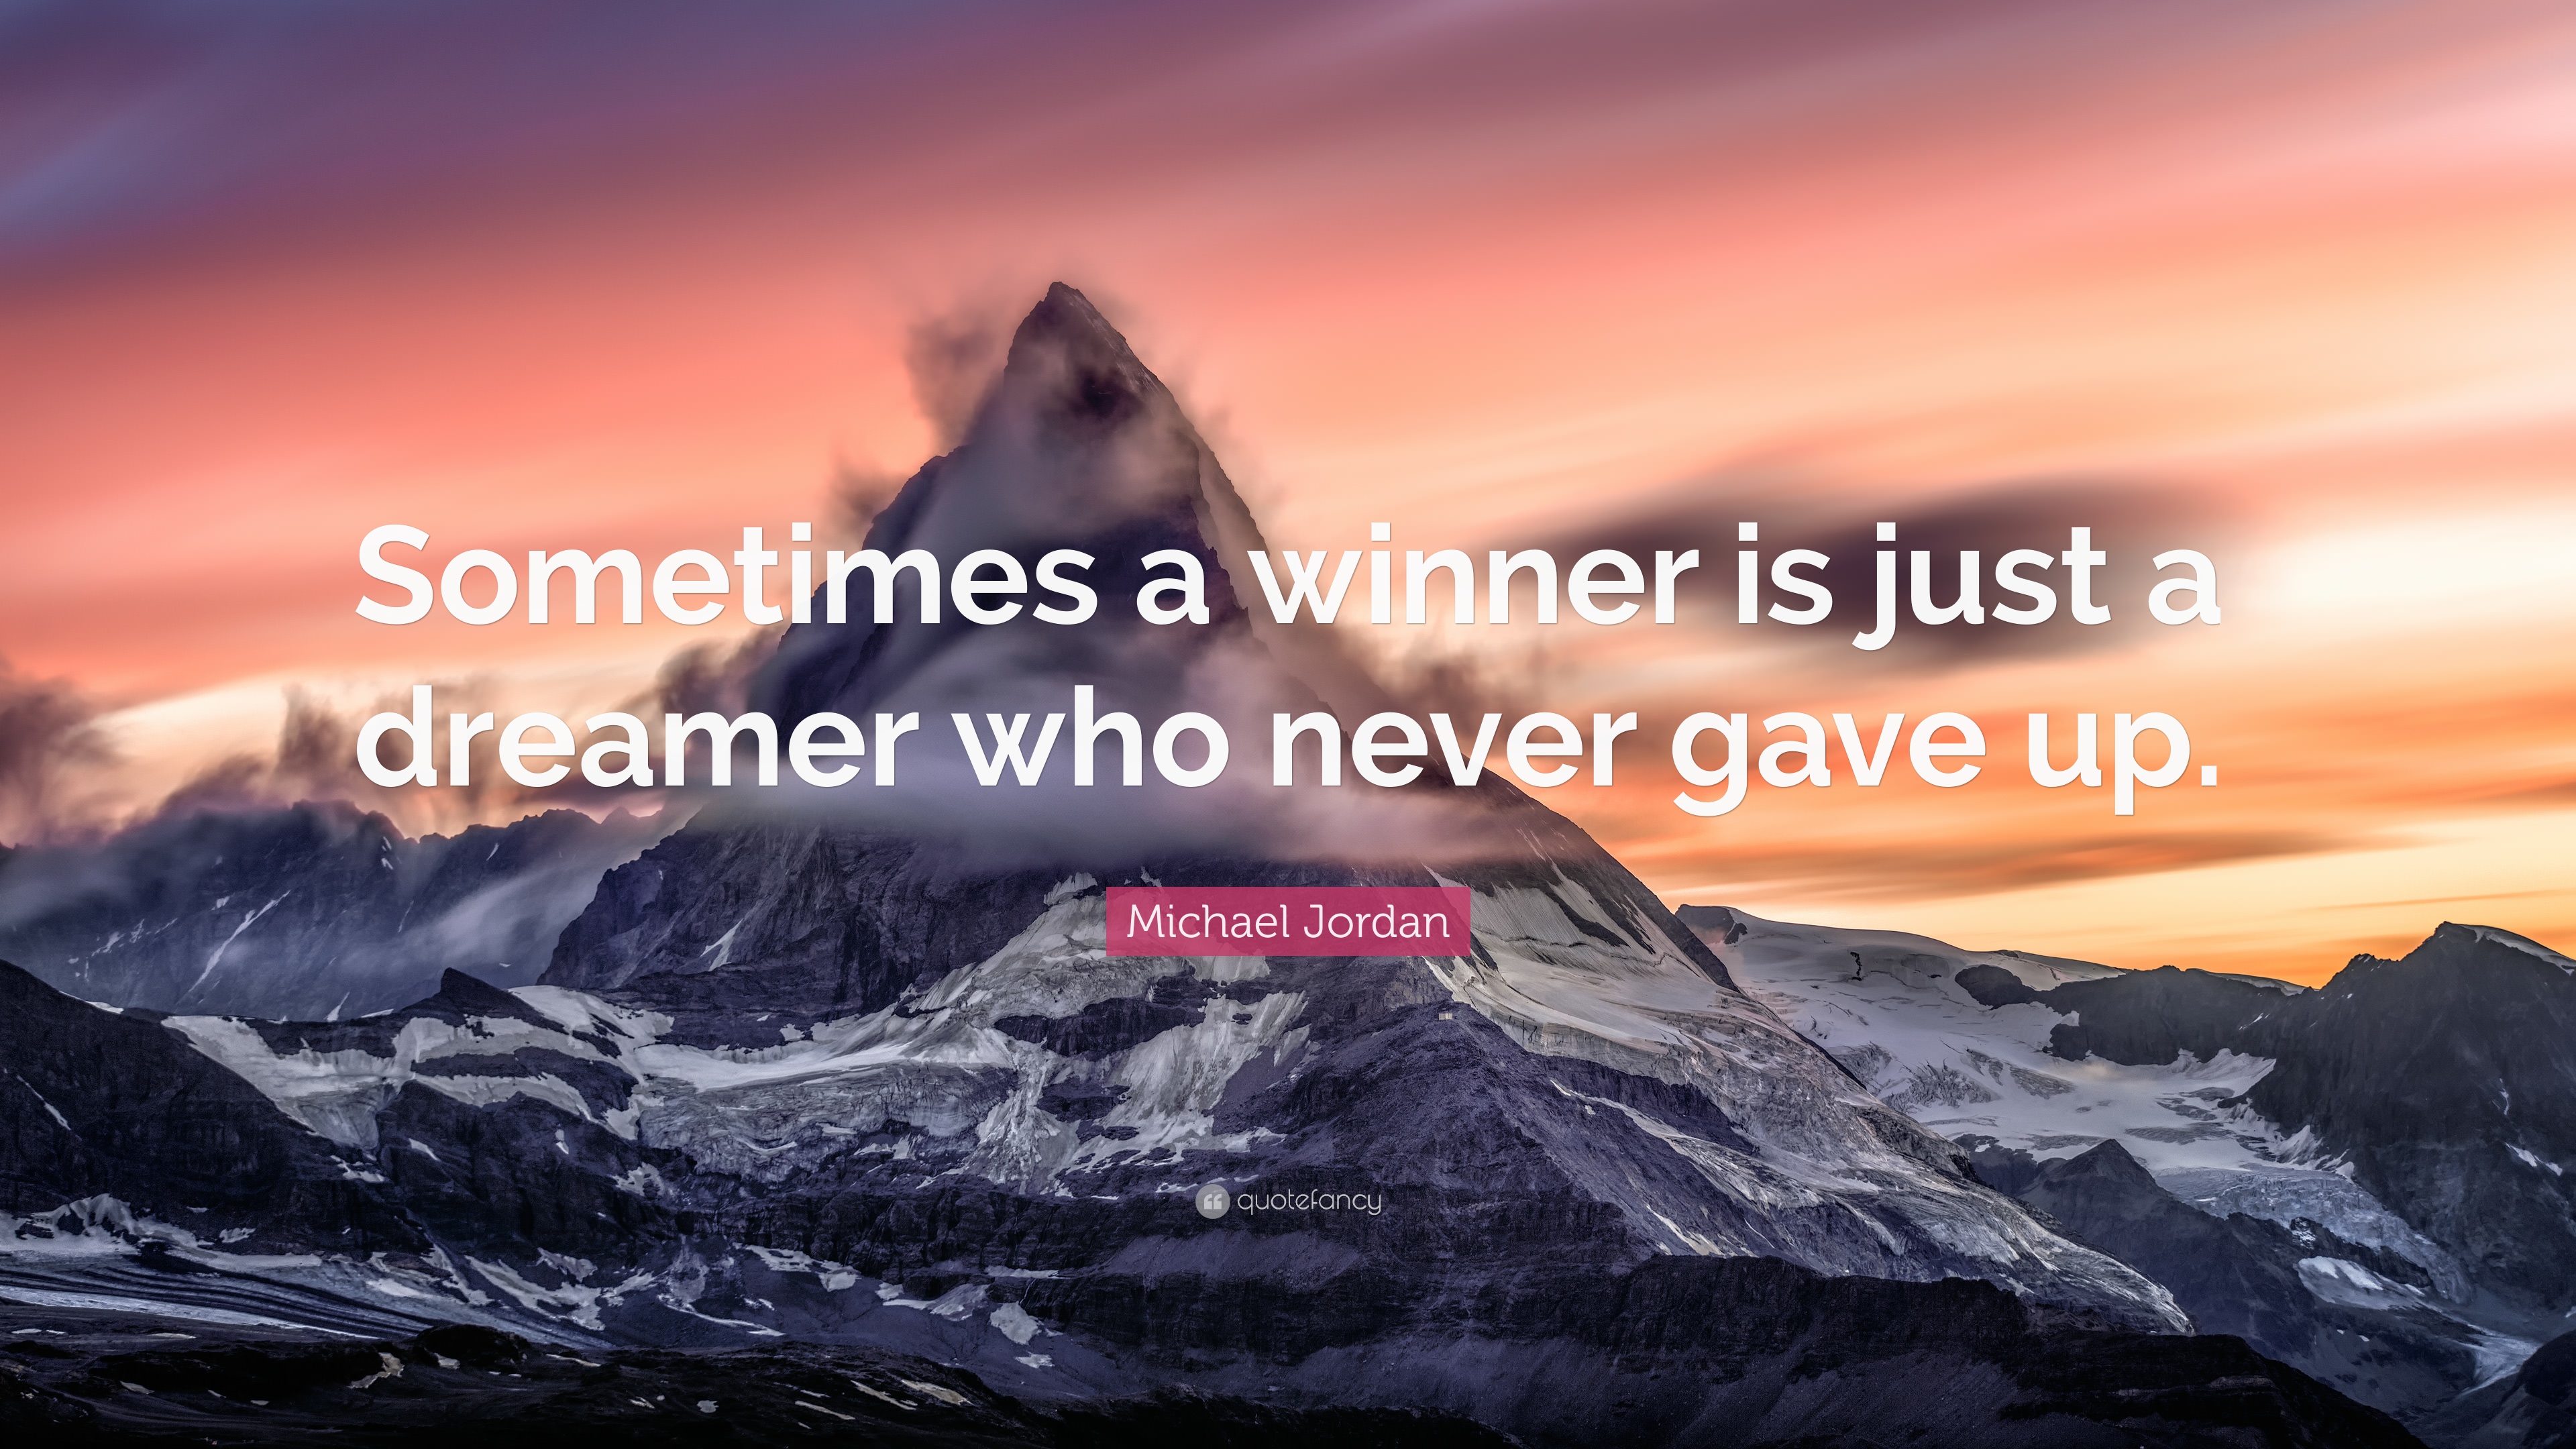 Michael Jordan Quote: “Sometimes a winner is just a dreamer who never gave up.”